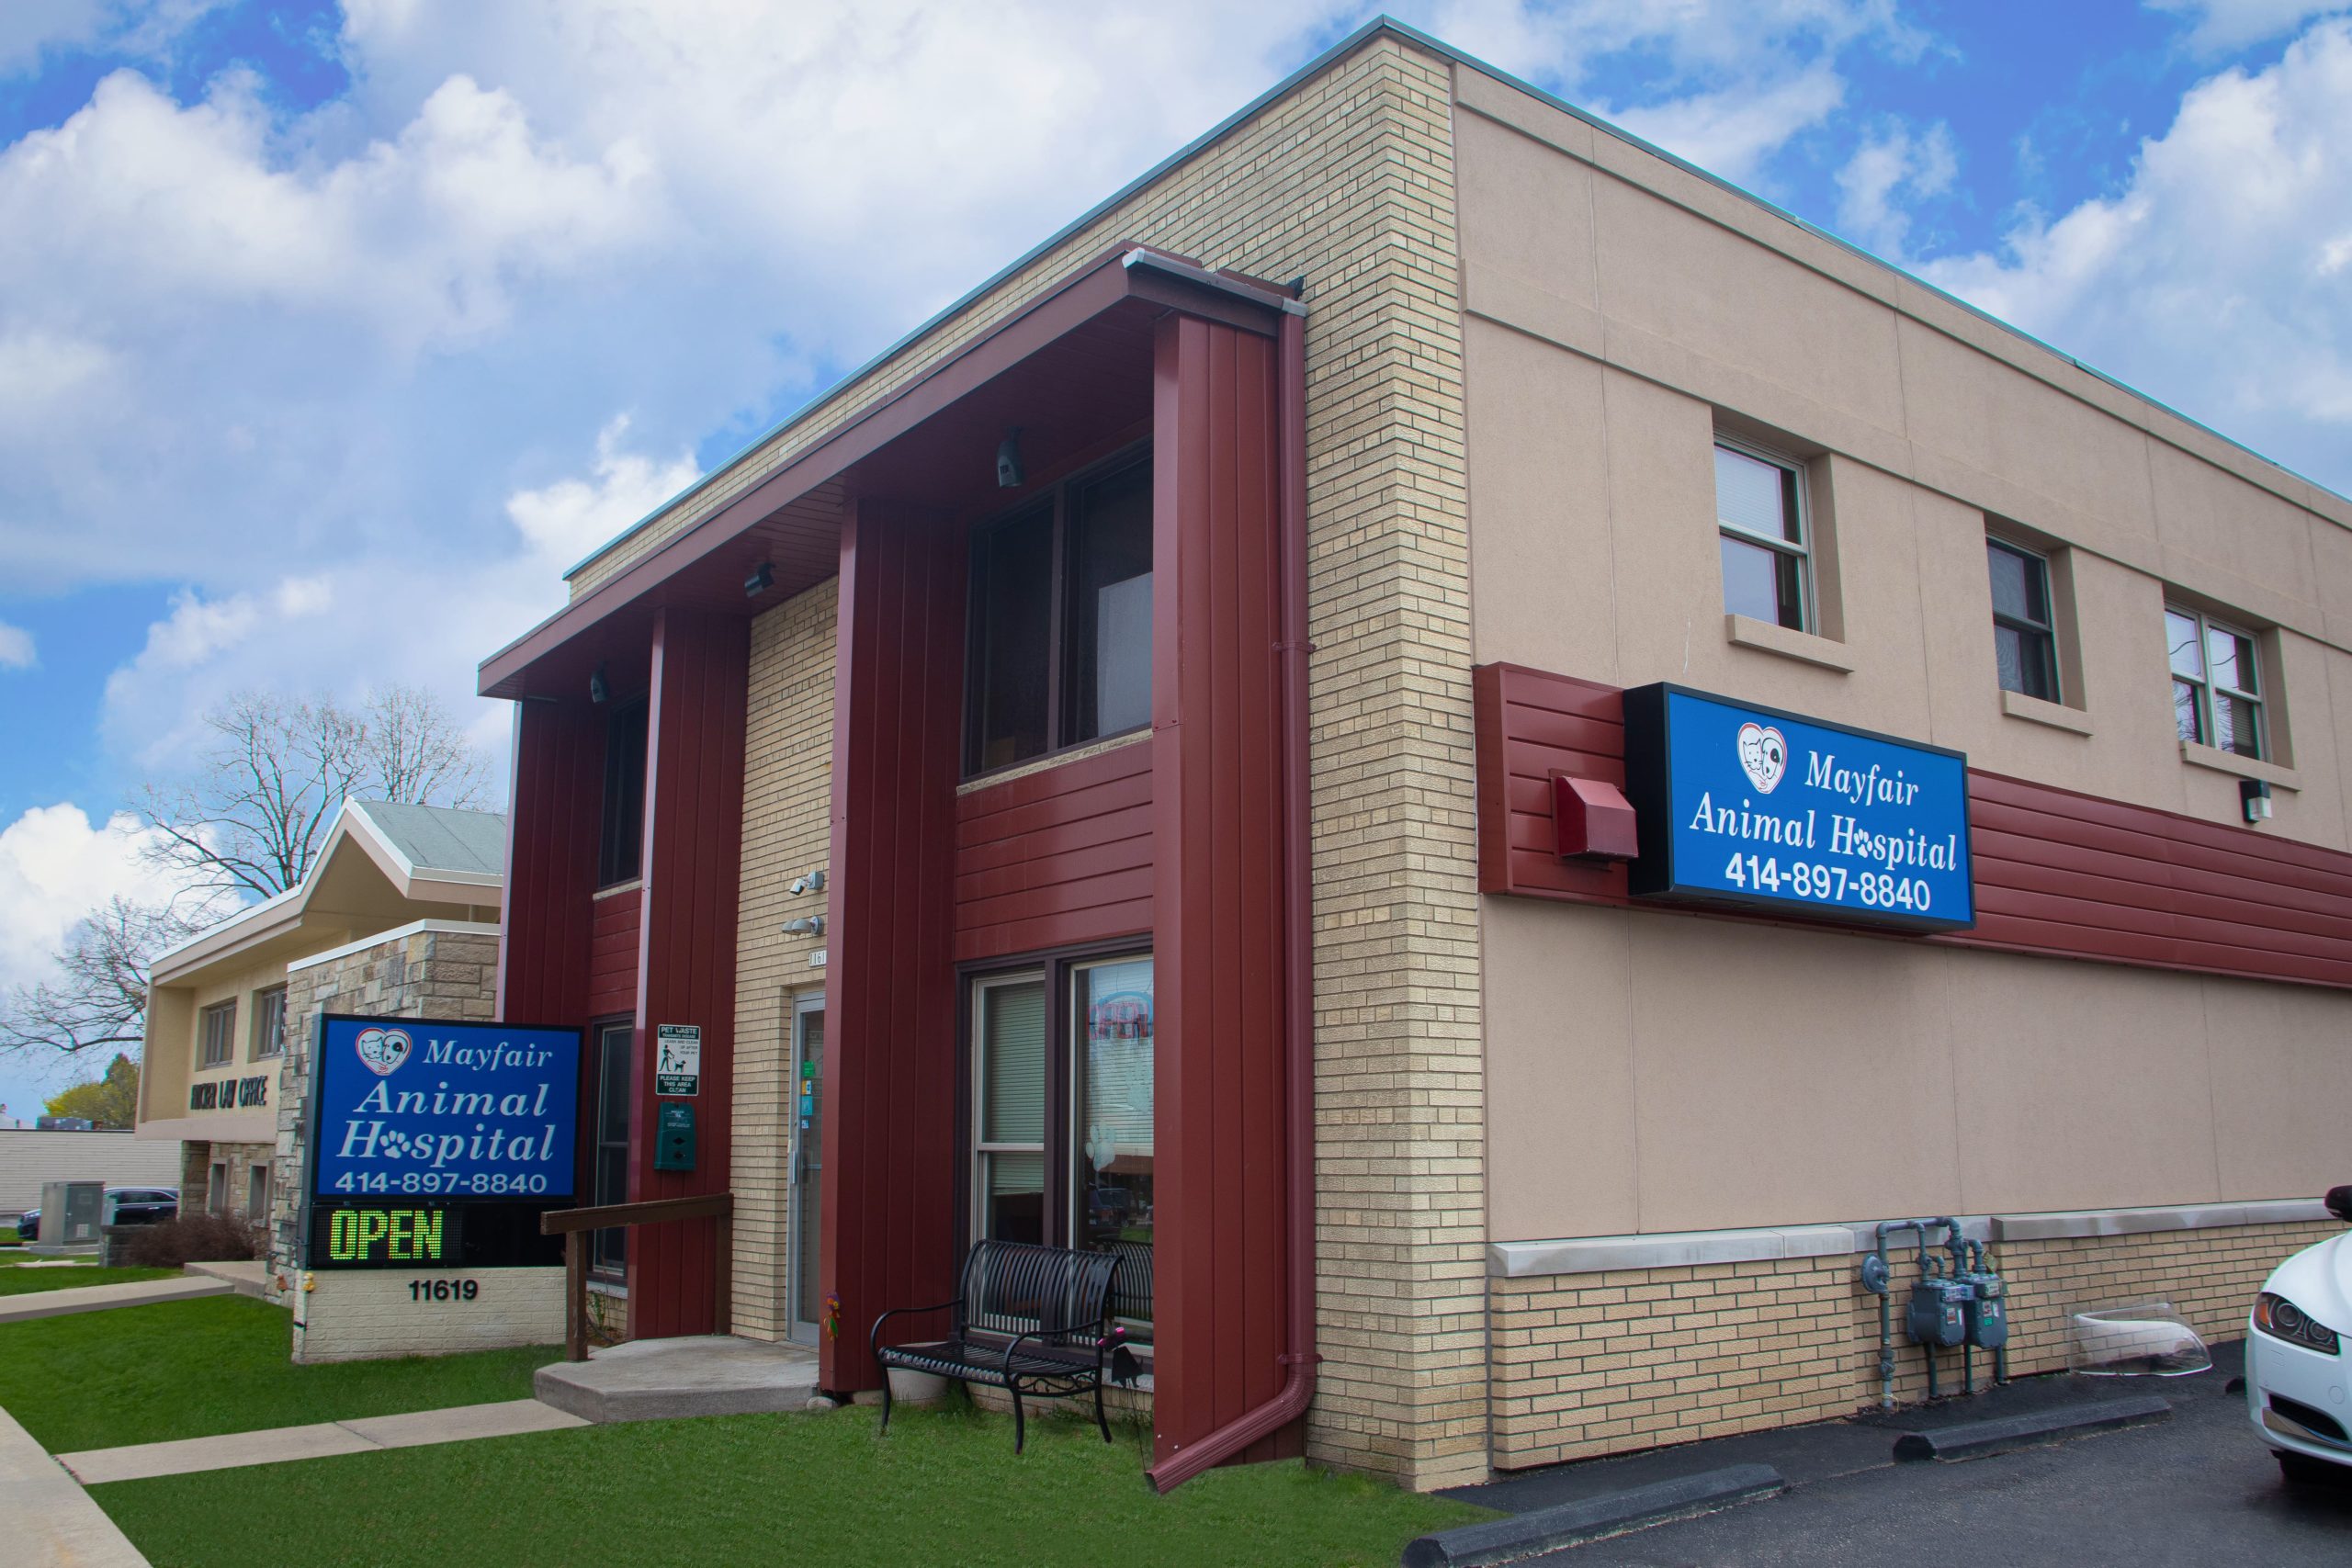 Our Hospital | Mayfair Animal Hospital & ER in Wauwatosa, WI